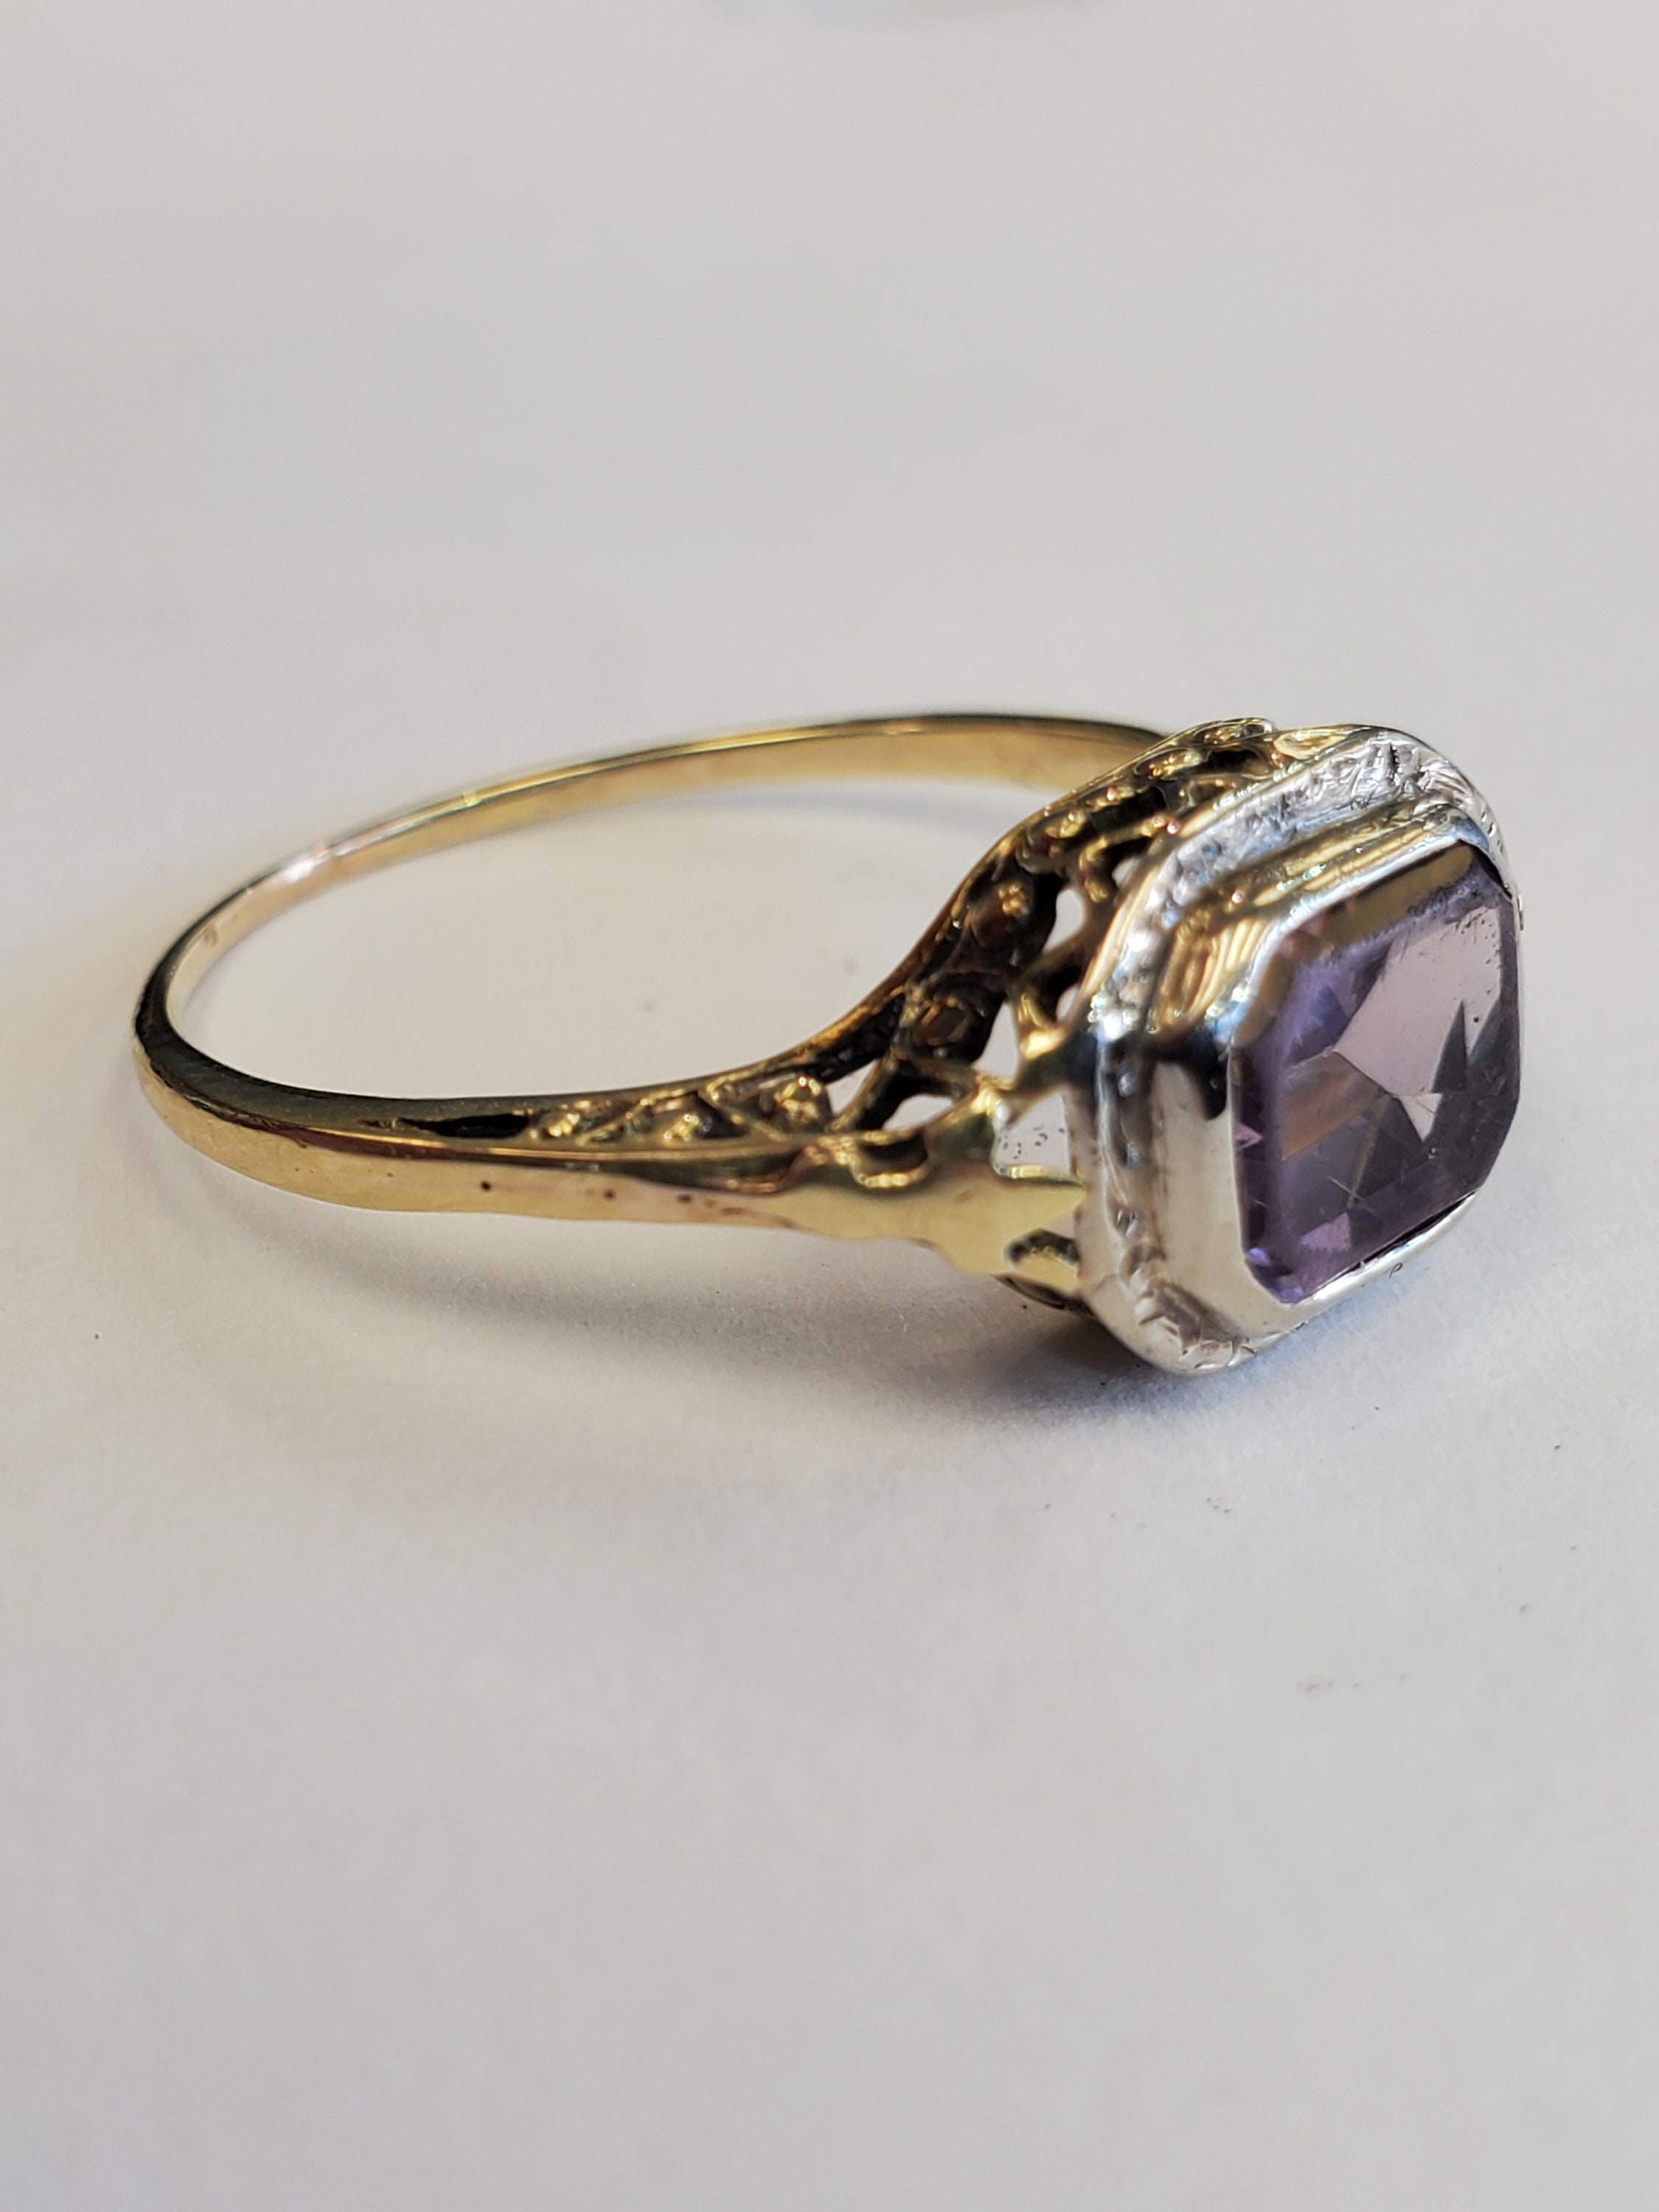 Product Image for Vintage filigree amethyst ring 14k two tone